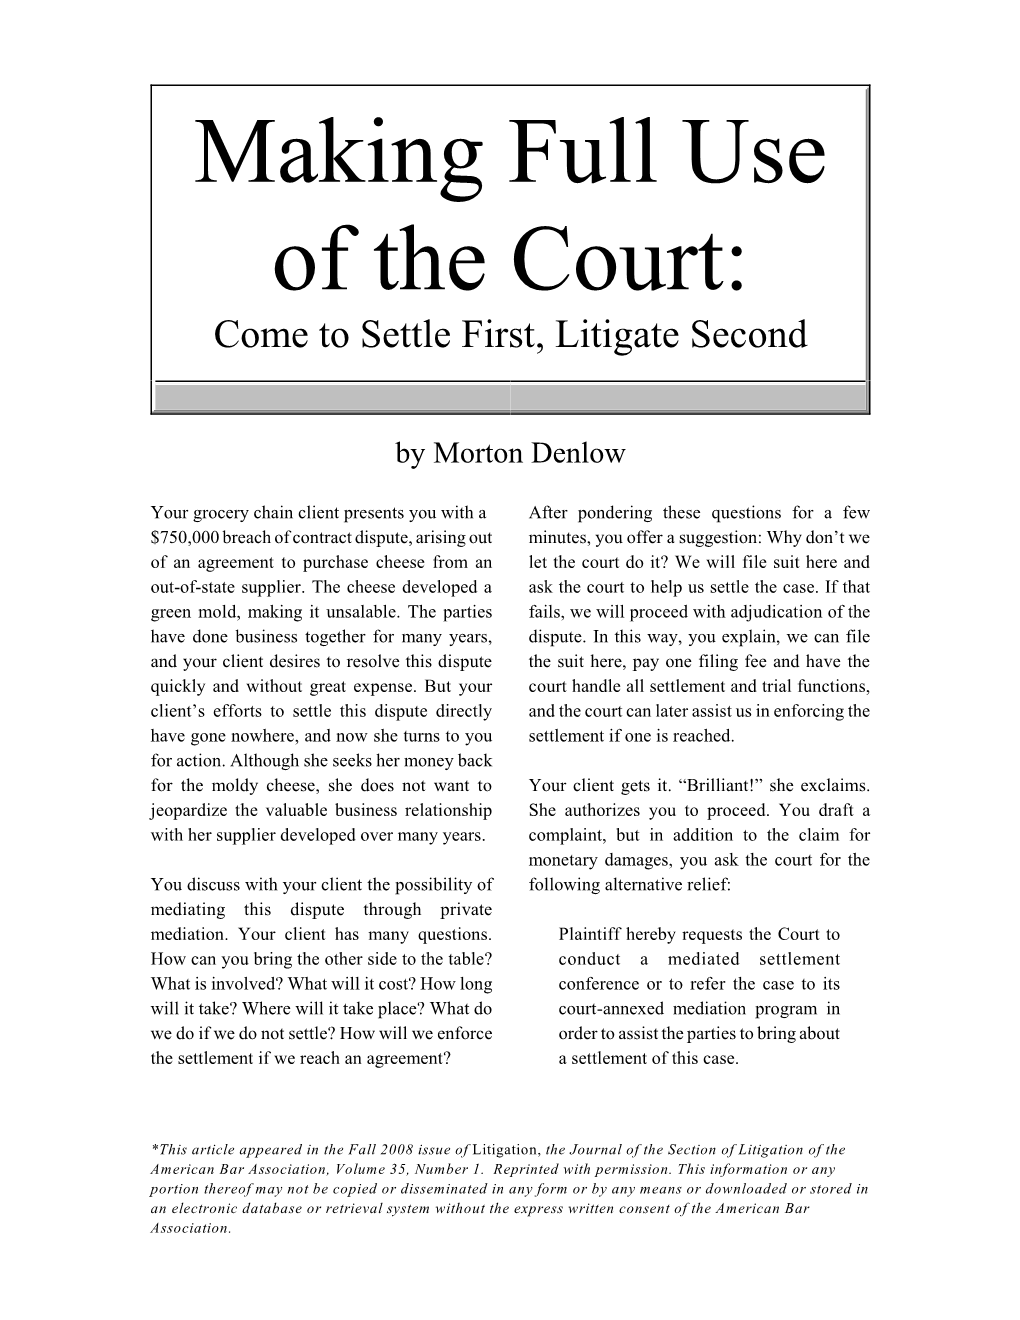 Making Full Use of the Court: Come to Settle First, Litigate Second